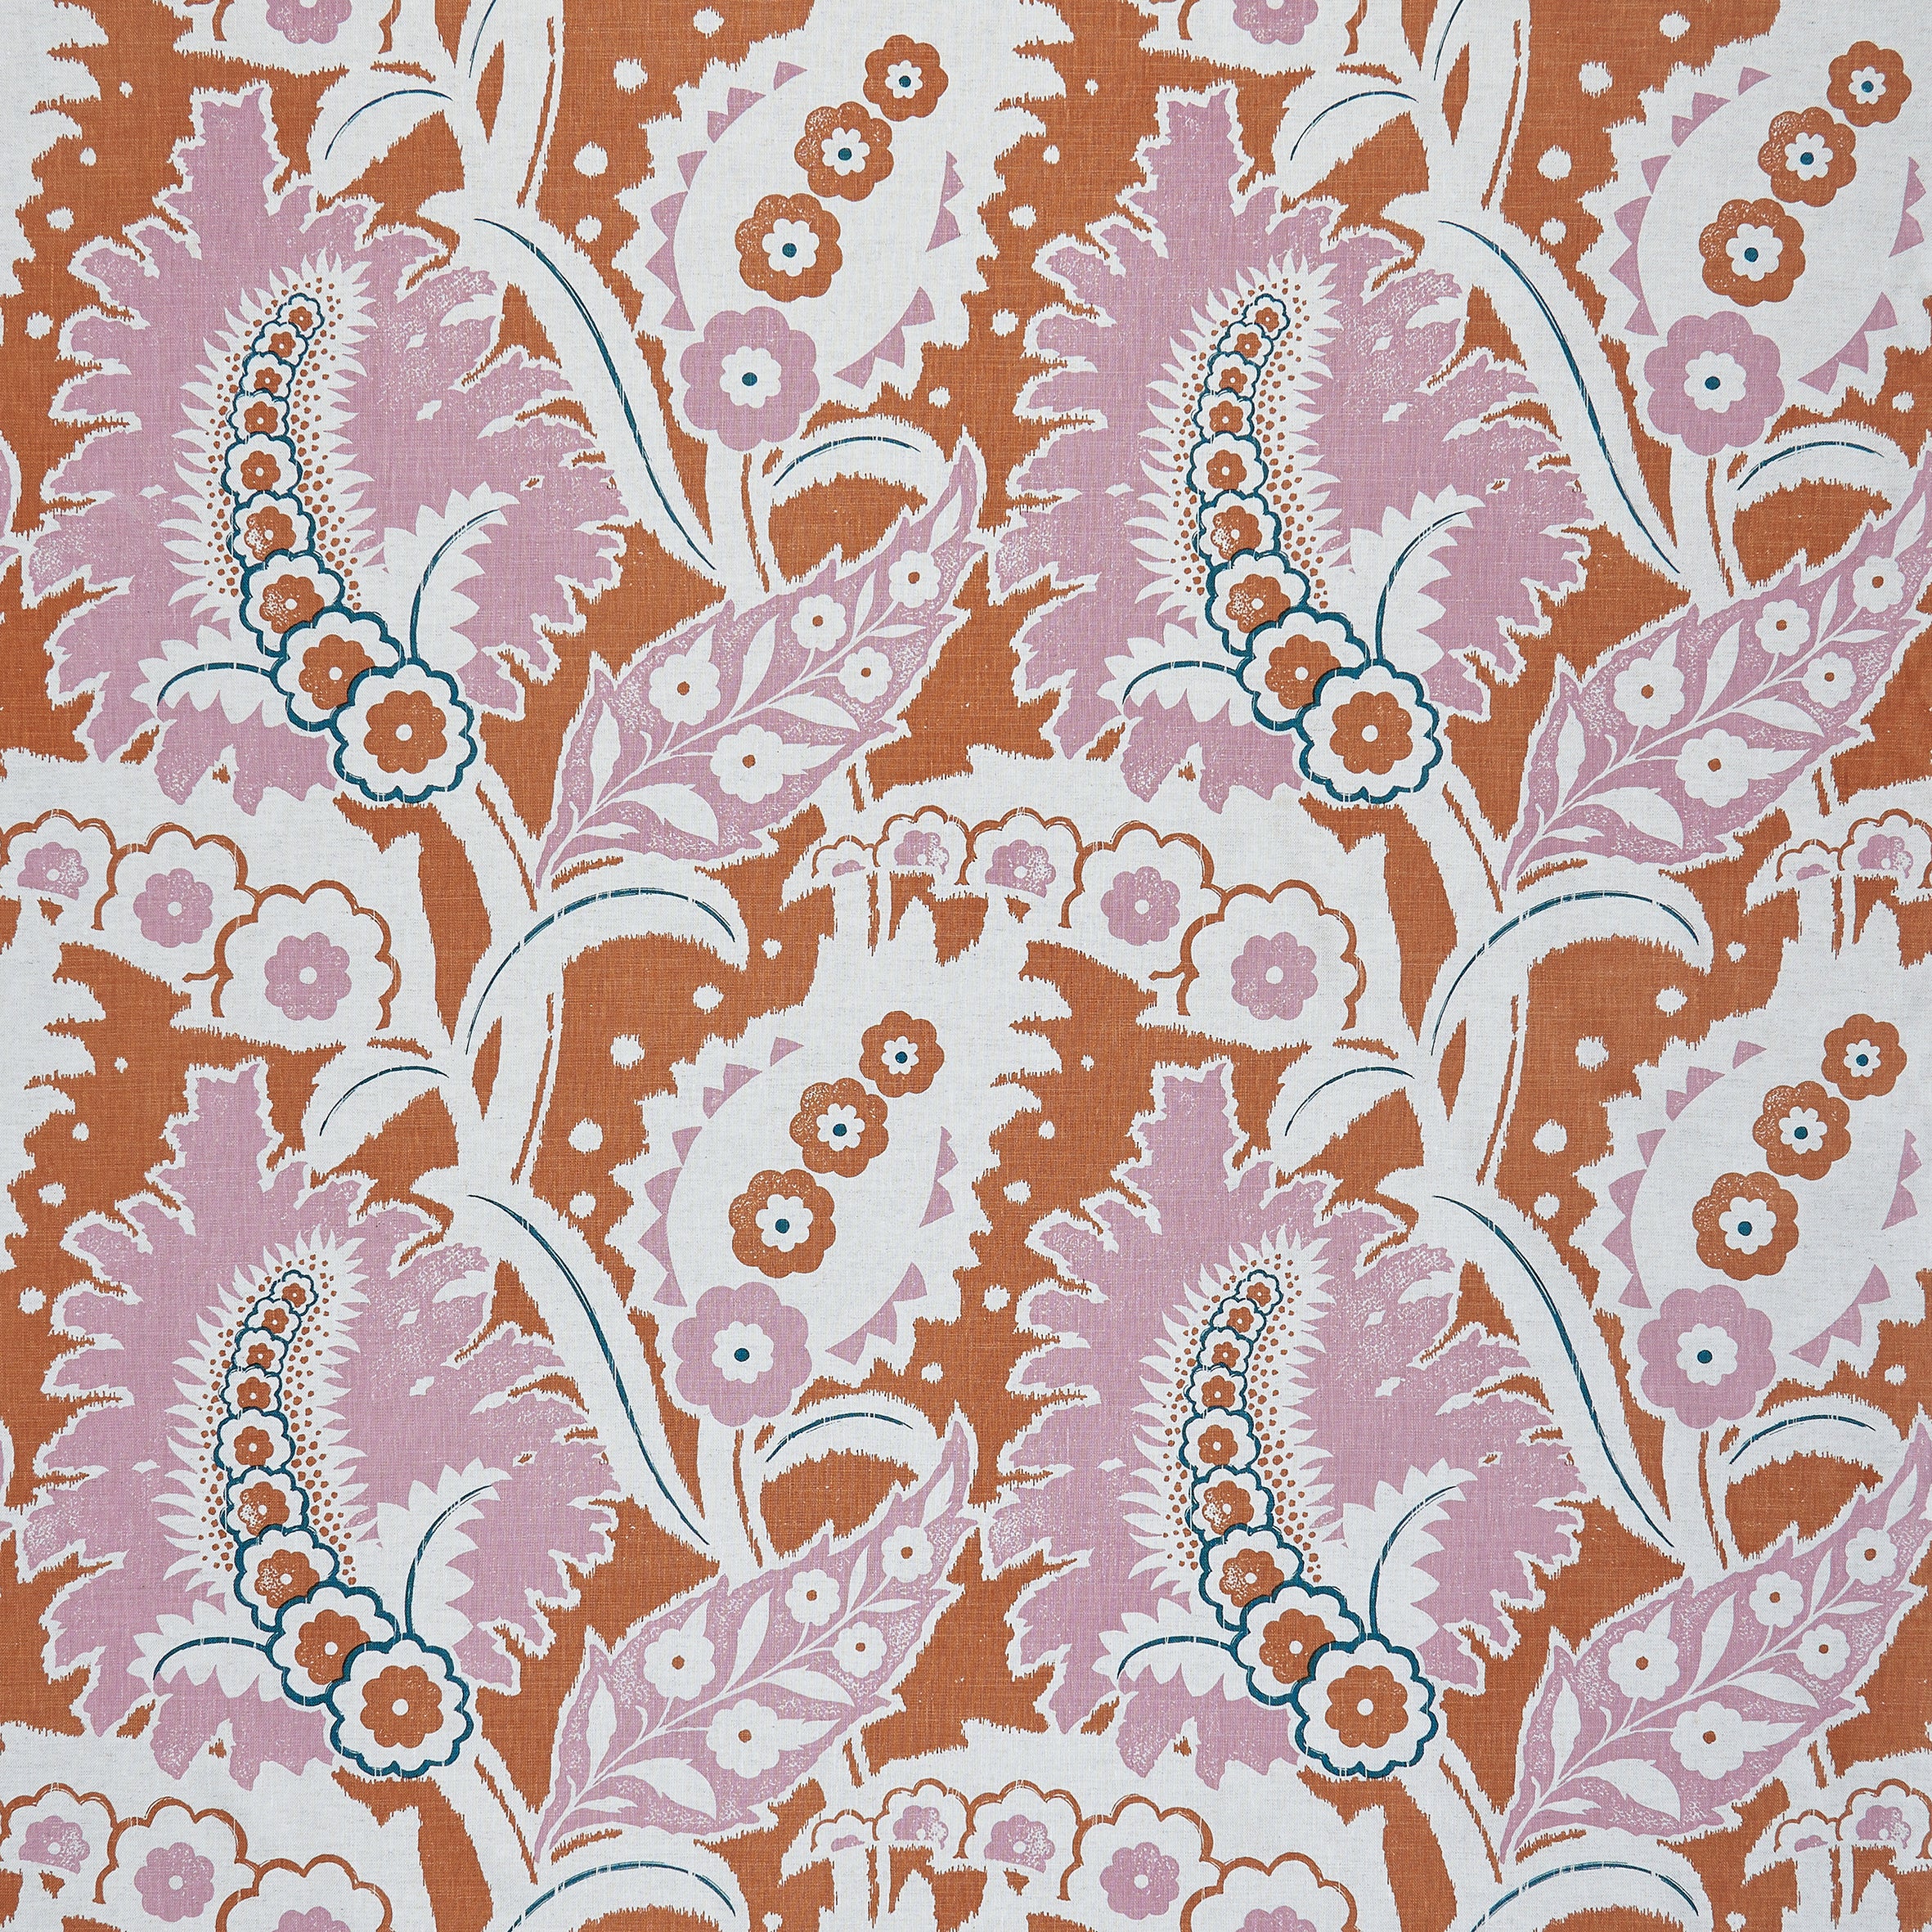 Detail of fabric in a botanical paisley print in shades of white, pink and navy on a purple field.